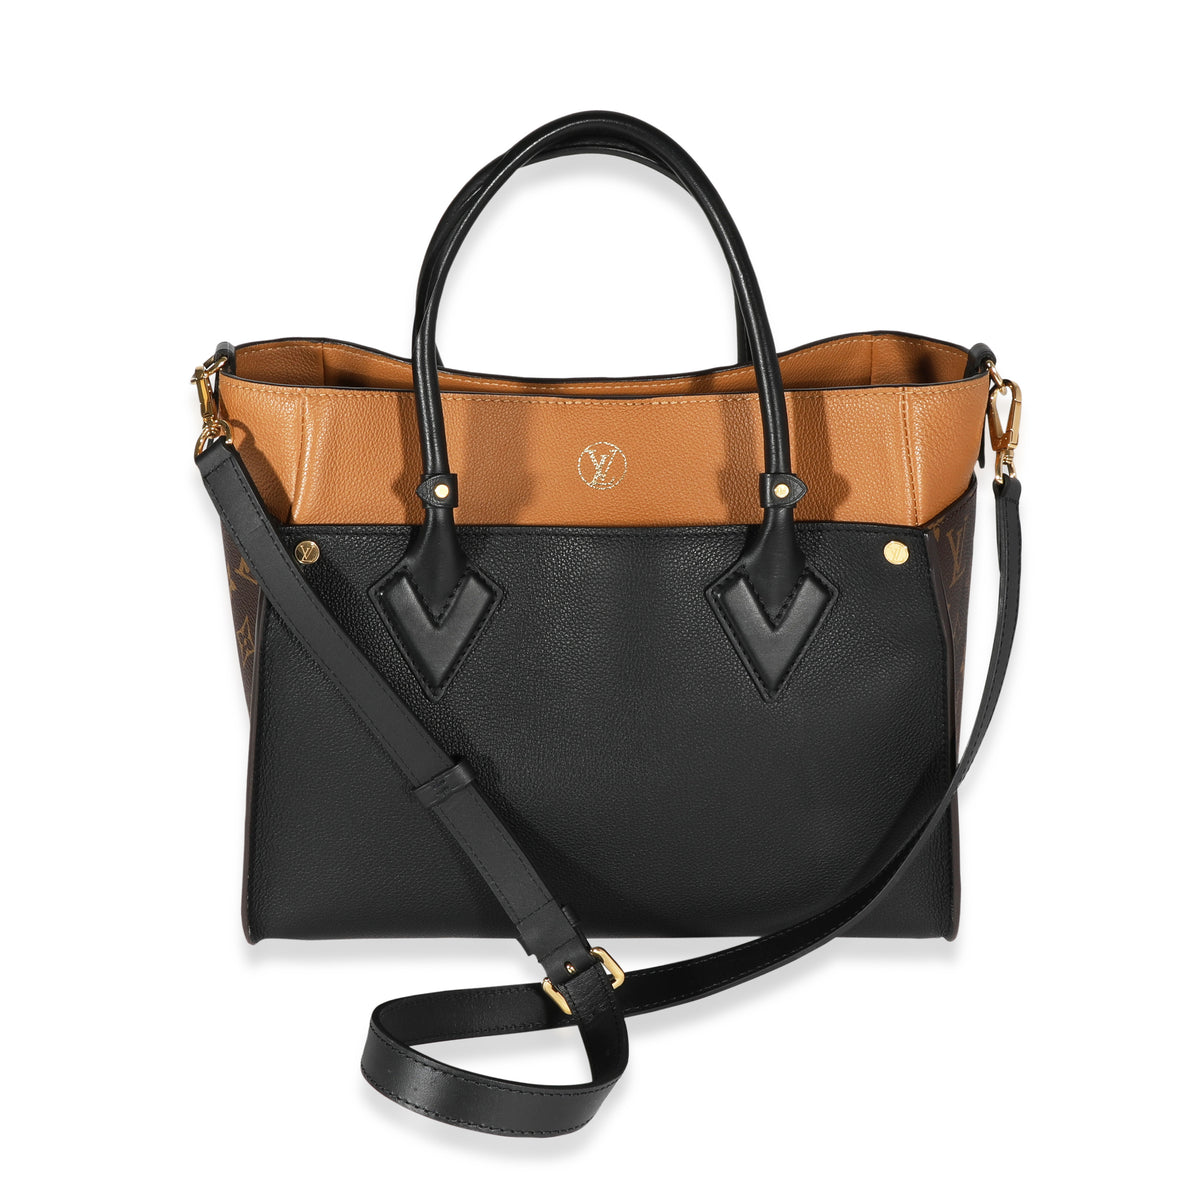 Shop Louis Vuitton On my side mm (On My Side MM, M22191) by Mikrie